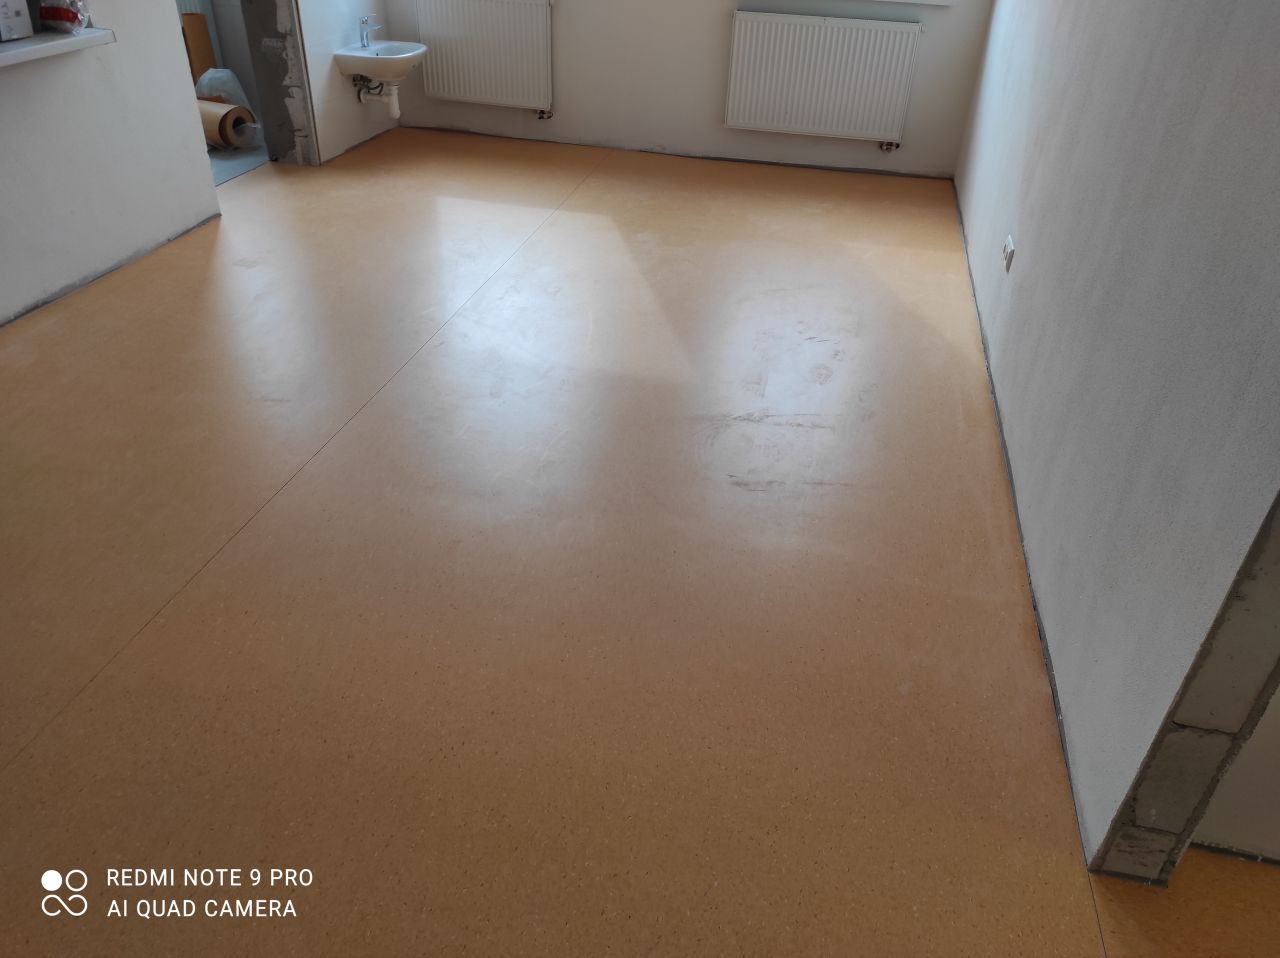 TO - Gerflor Mipolam 02